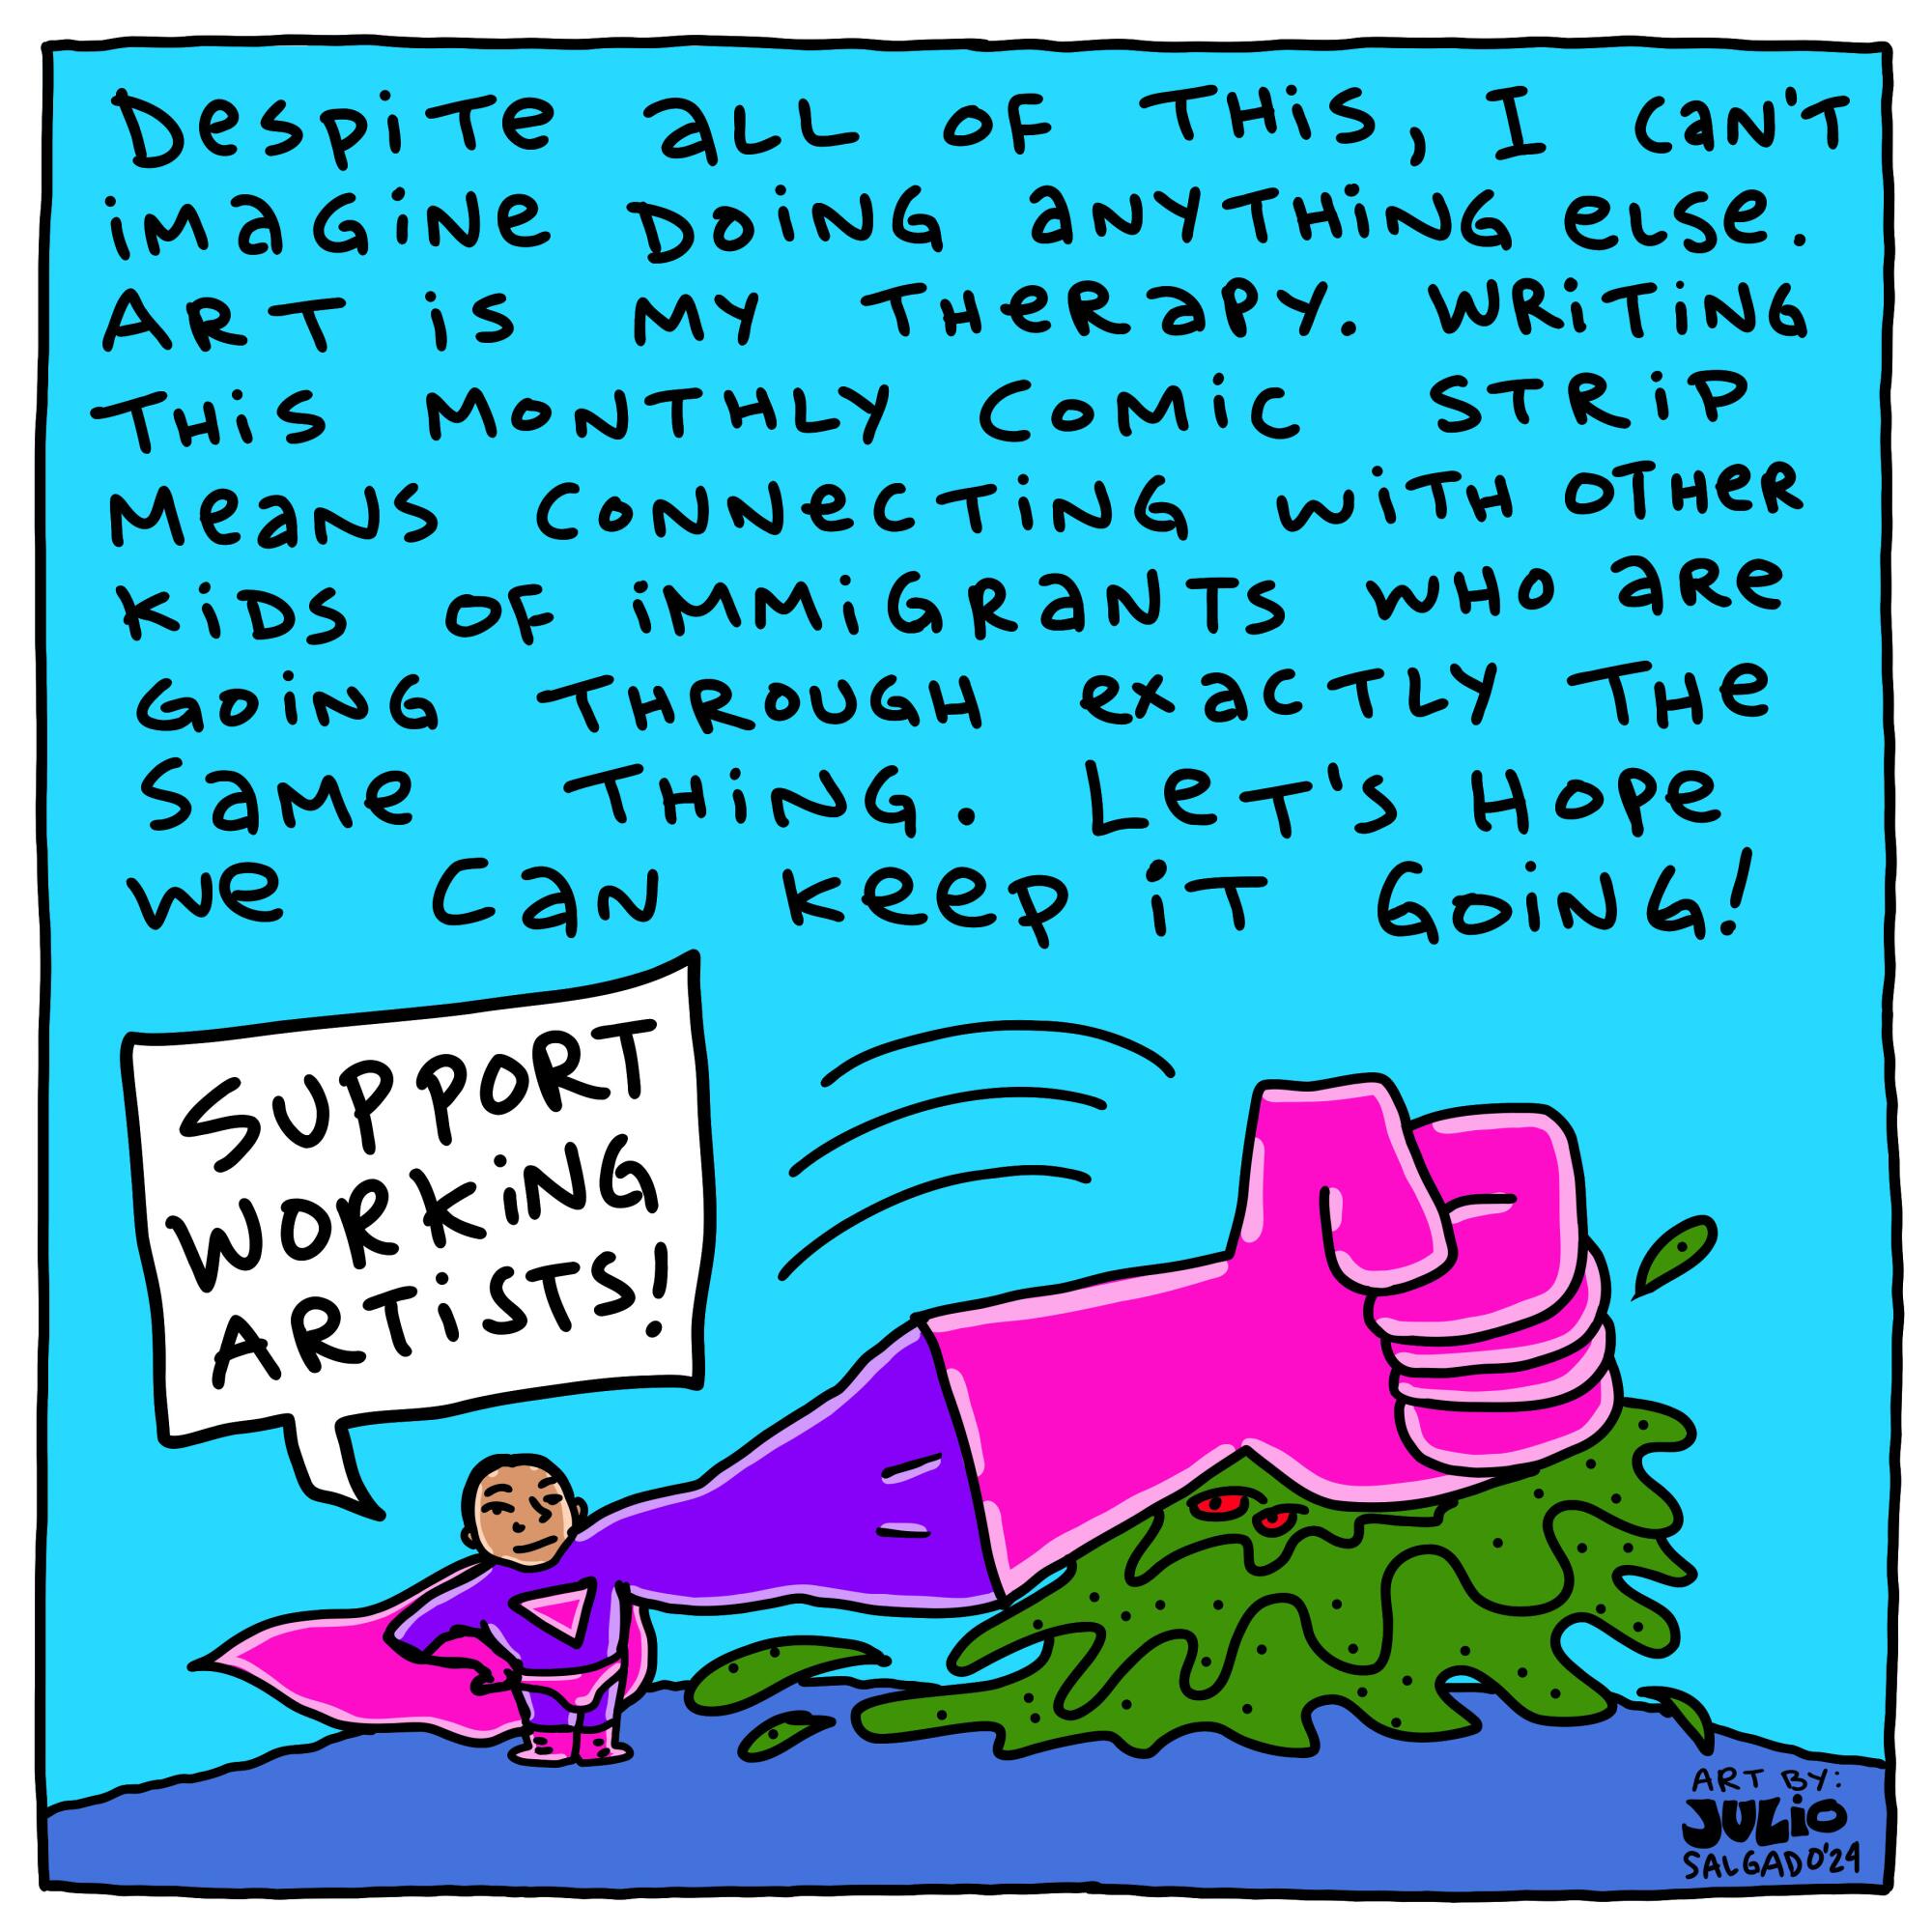 Art is my therapy. Writing this monthly strip means connecting with other kids of immigrants. Let's hope we can keep it going